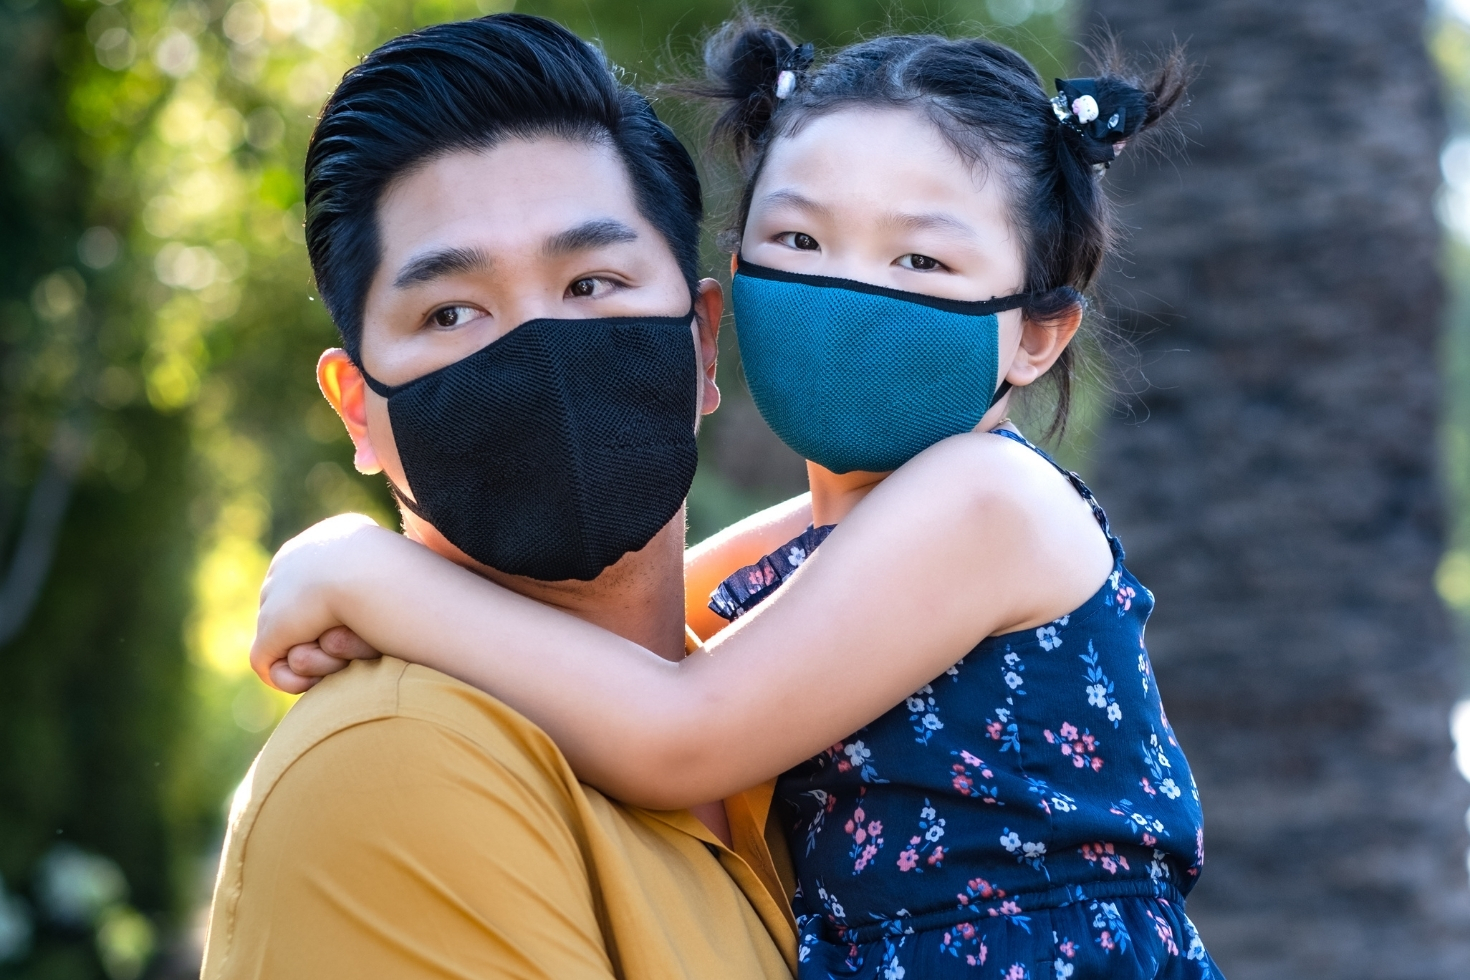 Father holding daughter, both wearing masks